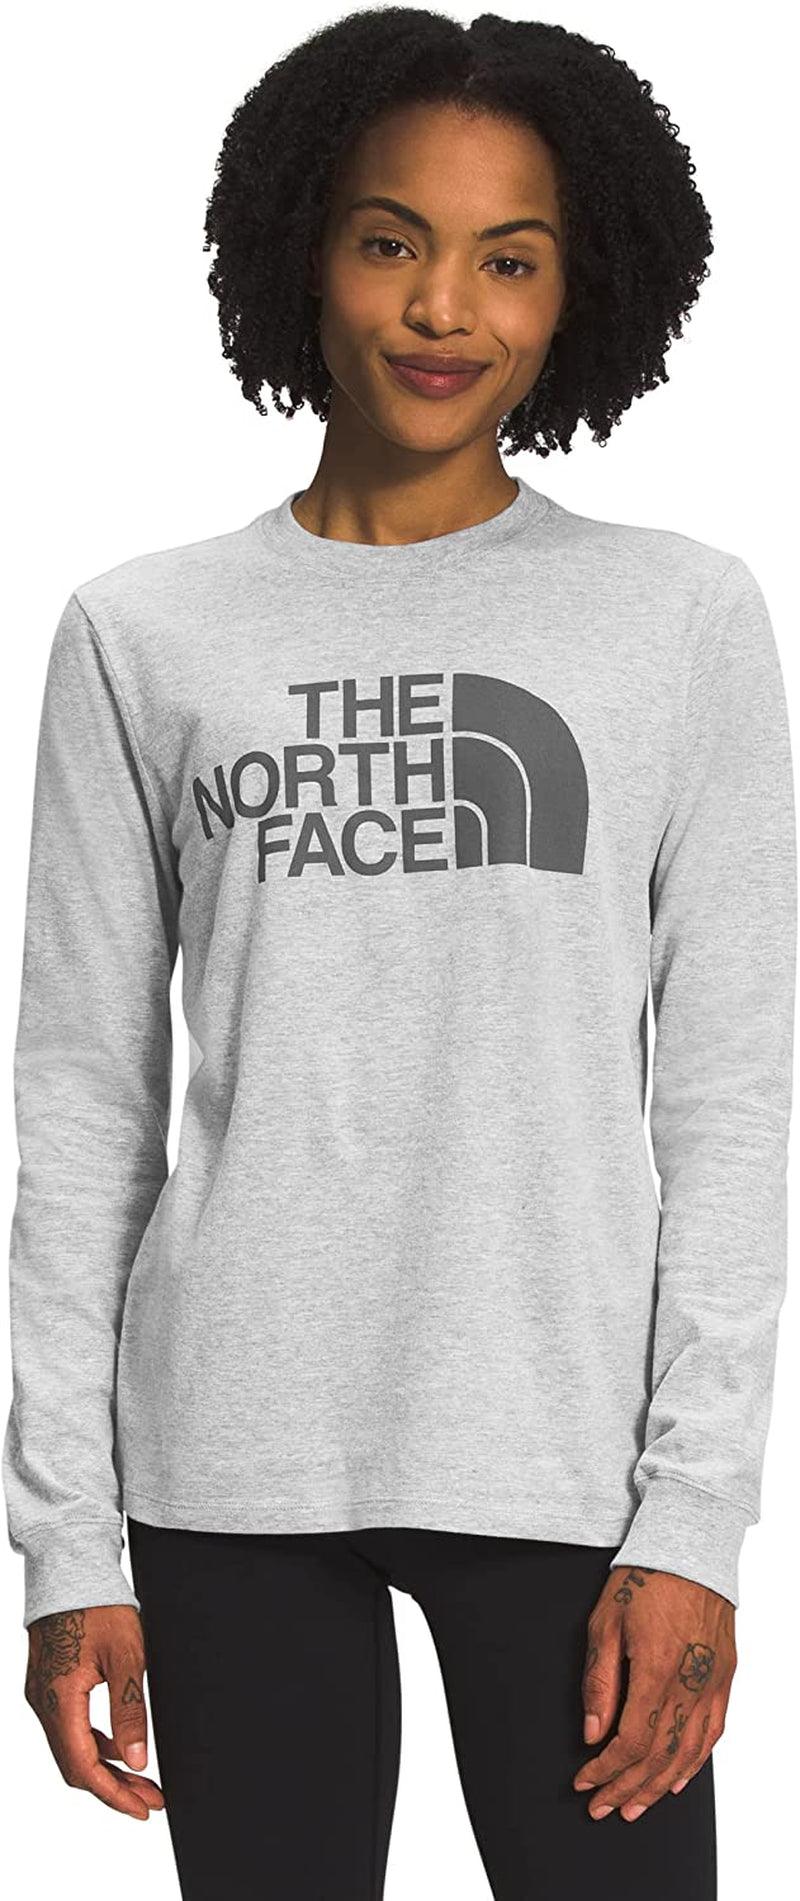 THE NORTH FACE Women'S Long Sleeve Half Dome Tee